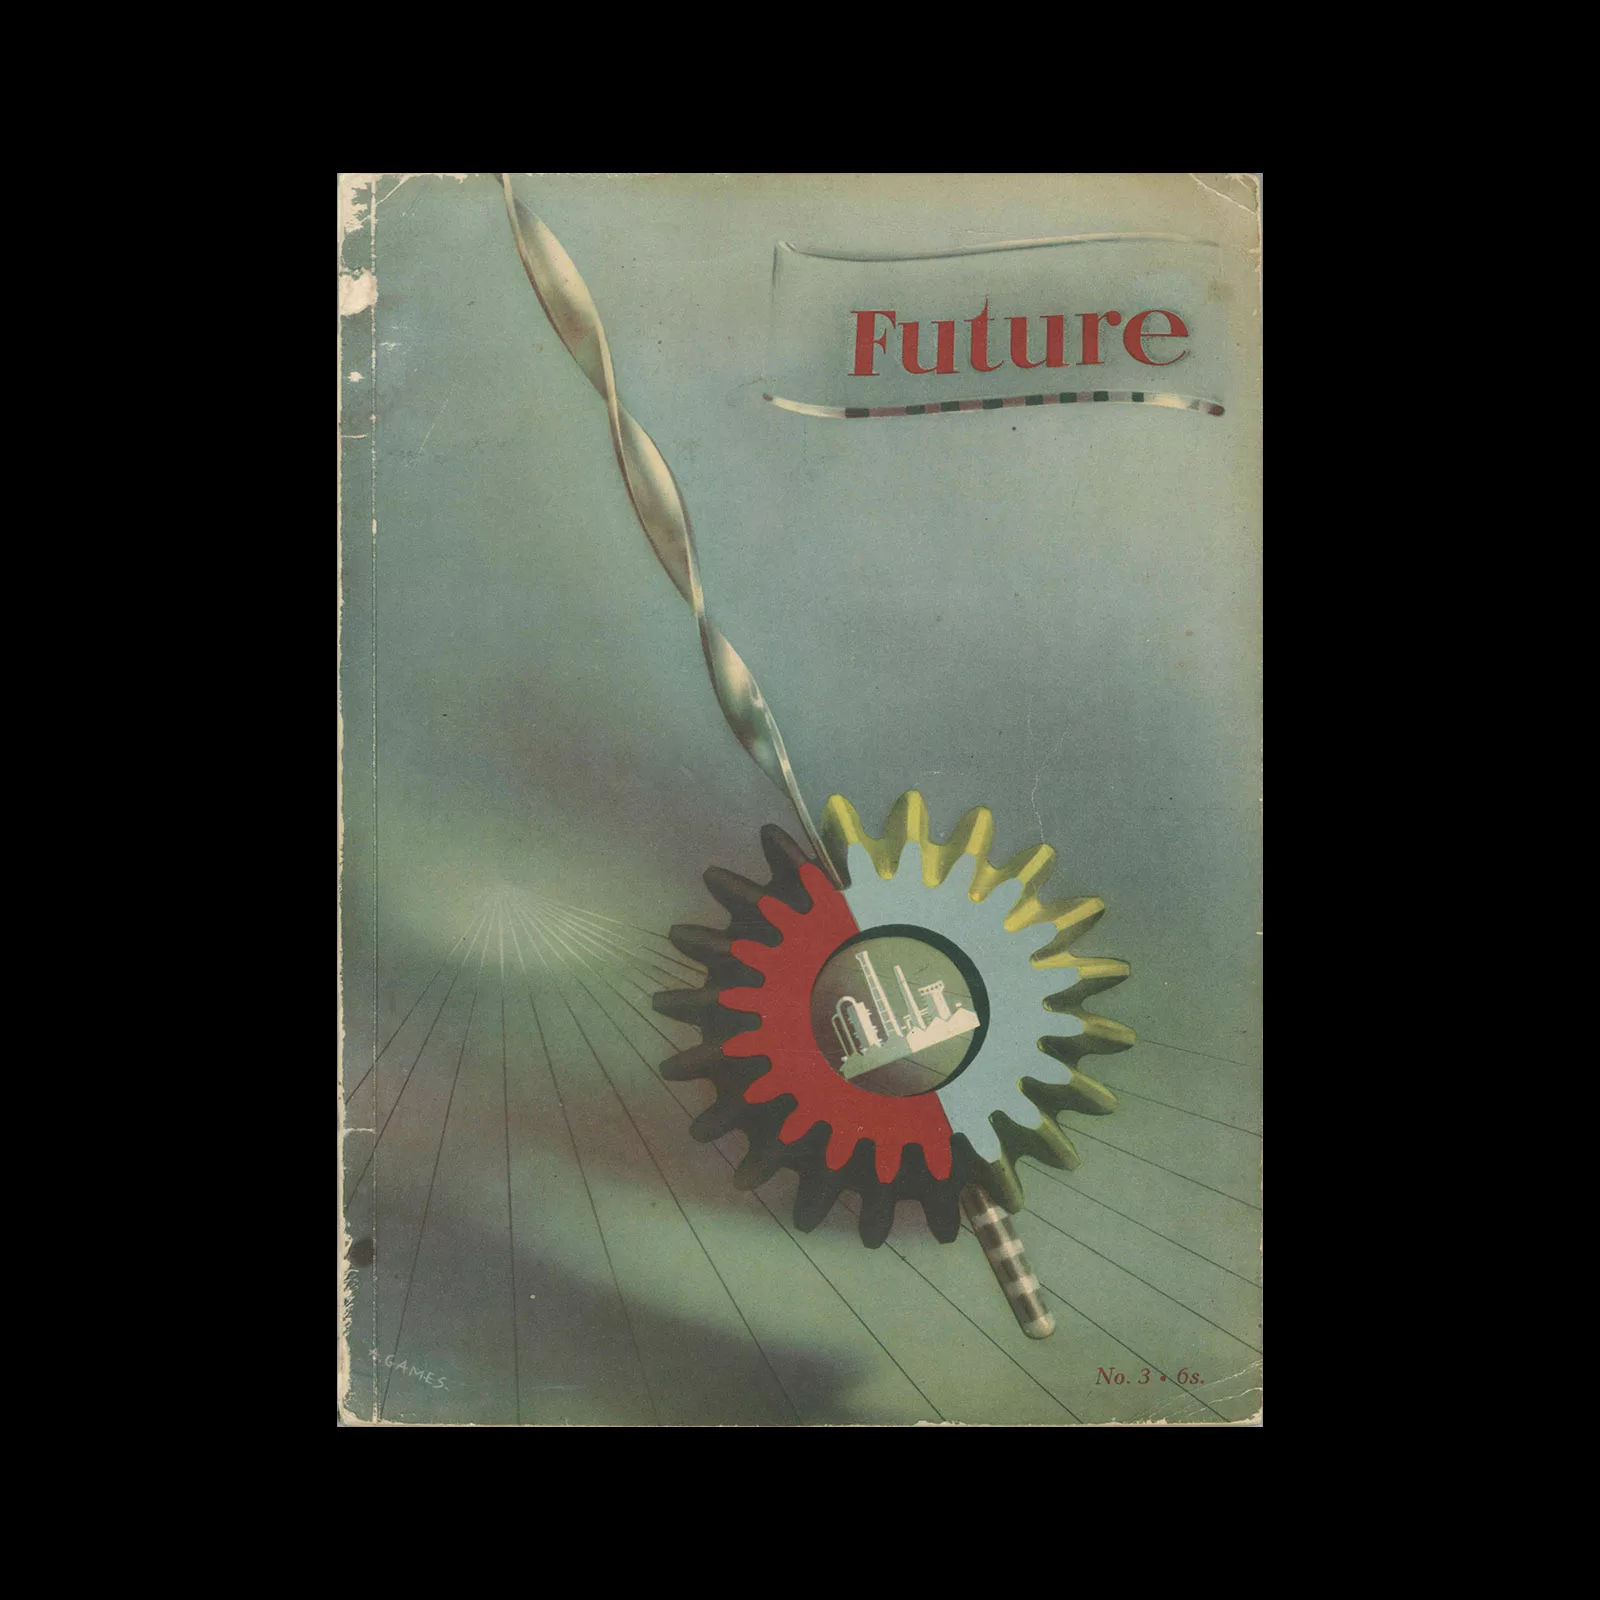 Future Books Volume 3, no 3 – Overture, Industry Government Science Arts, 1948. Cover design by Abram Games